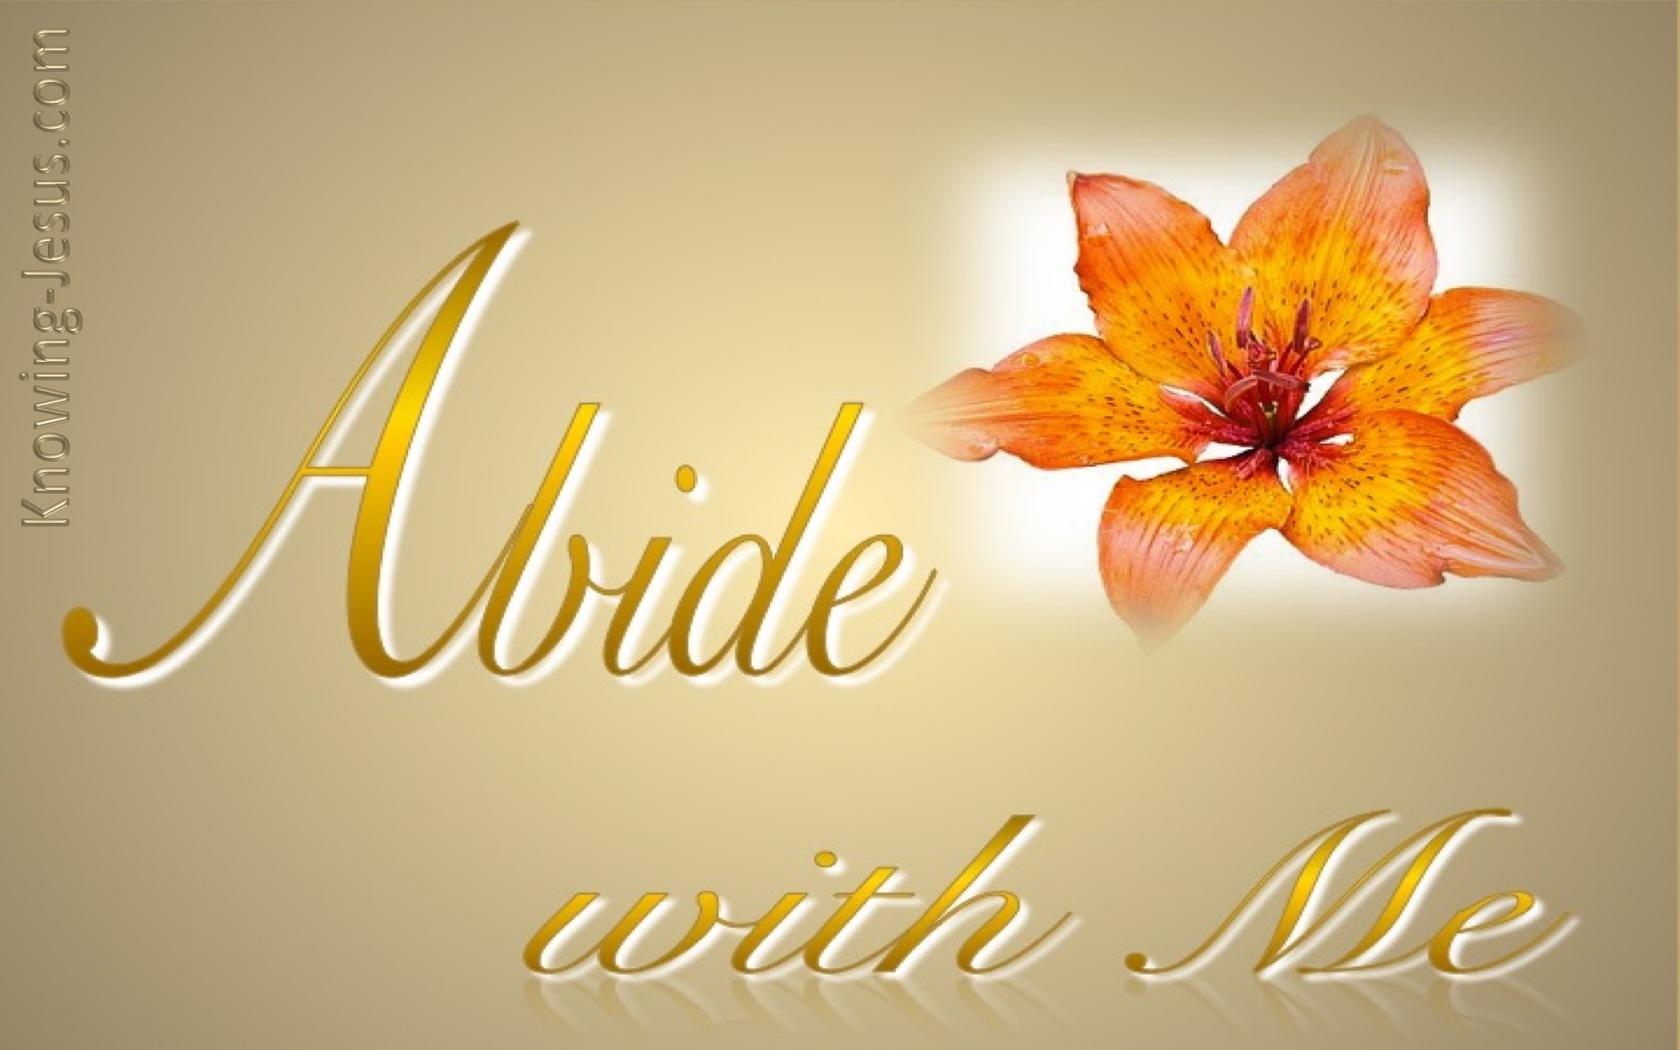 Abide With Me (devotional)10-07 (gold)